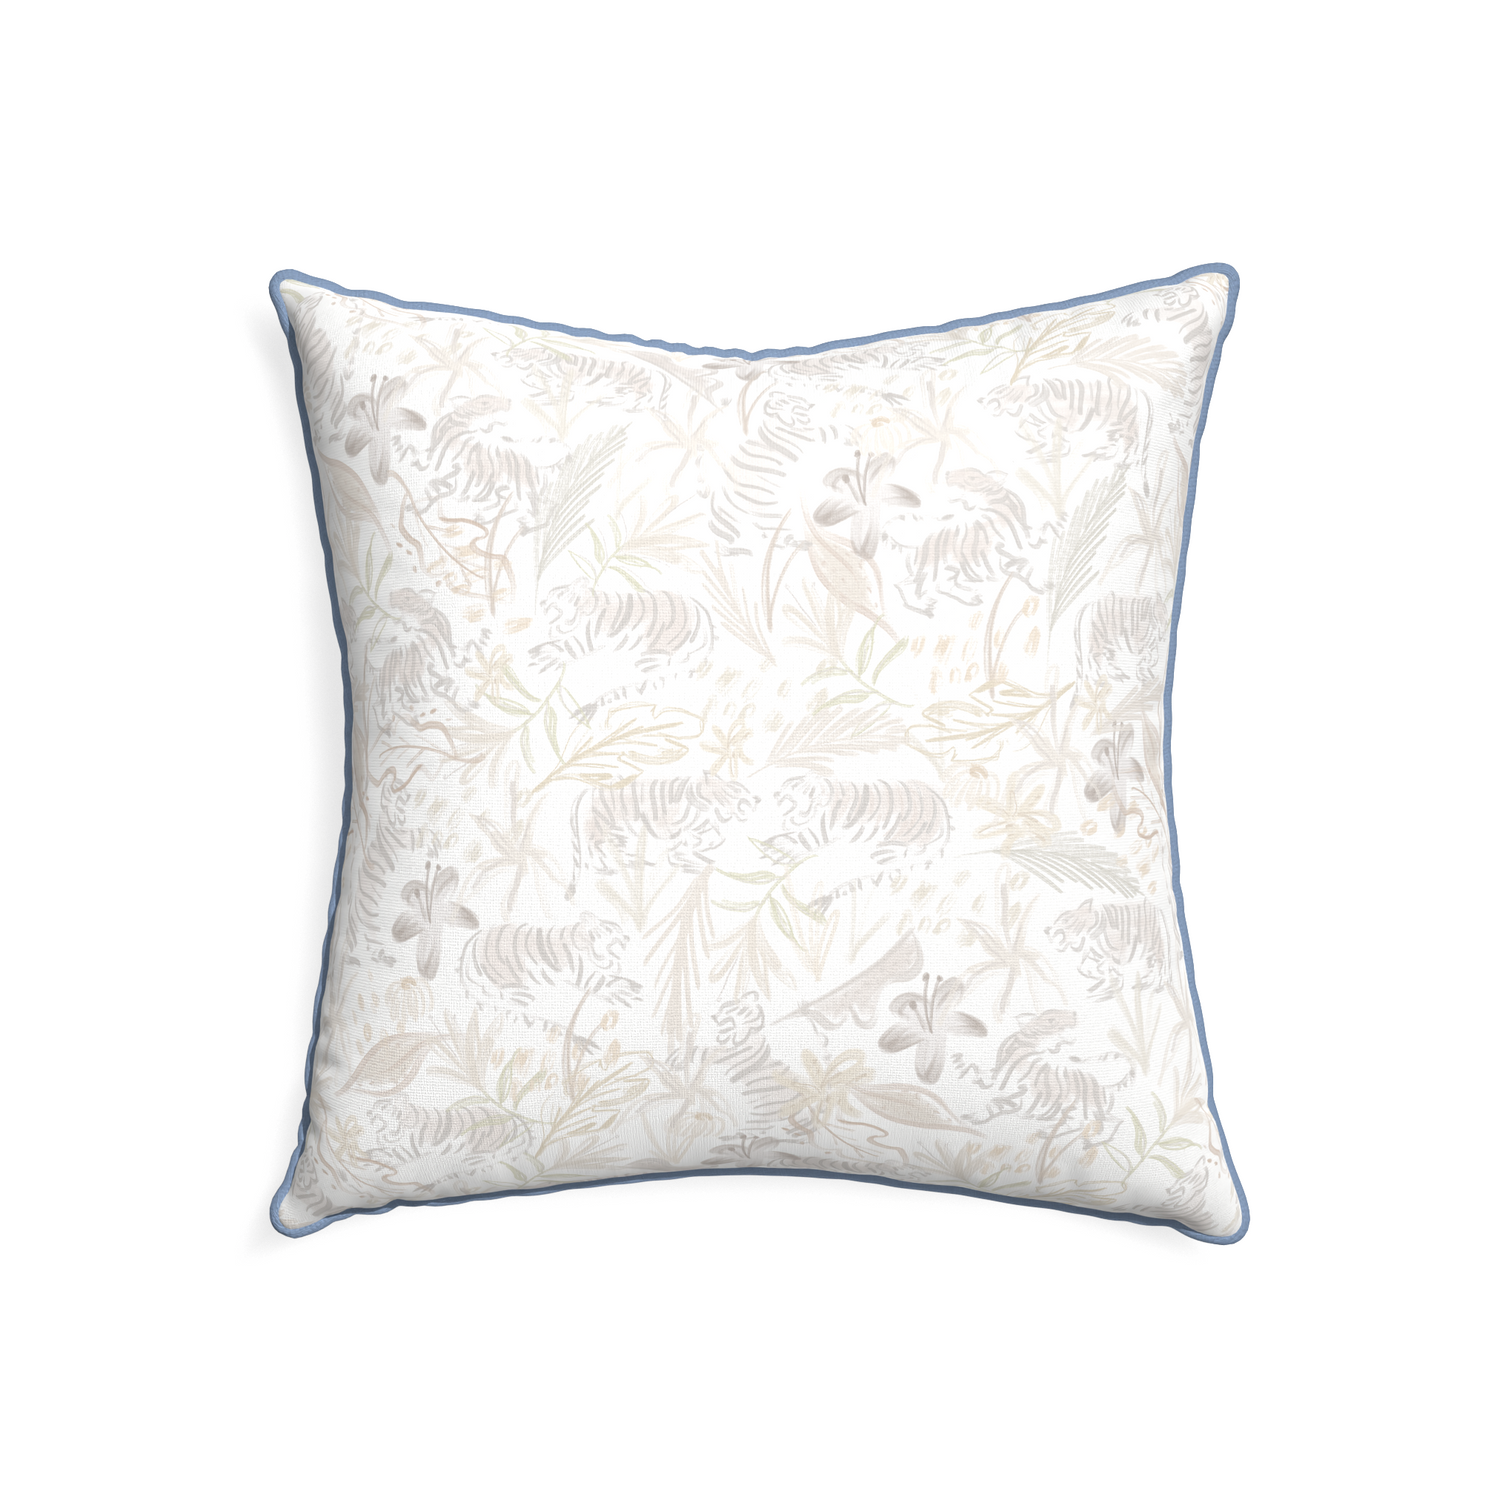 22-square frida sand custom beige chinoiserie tigerpillow with sky piping on white background